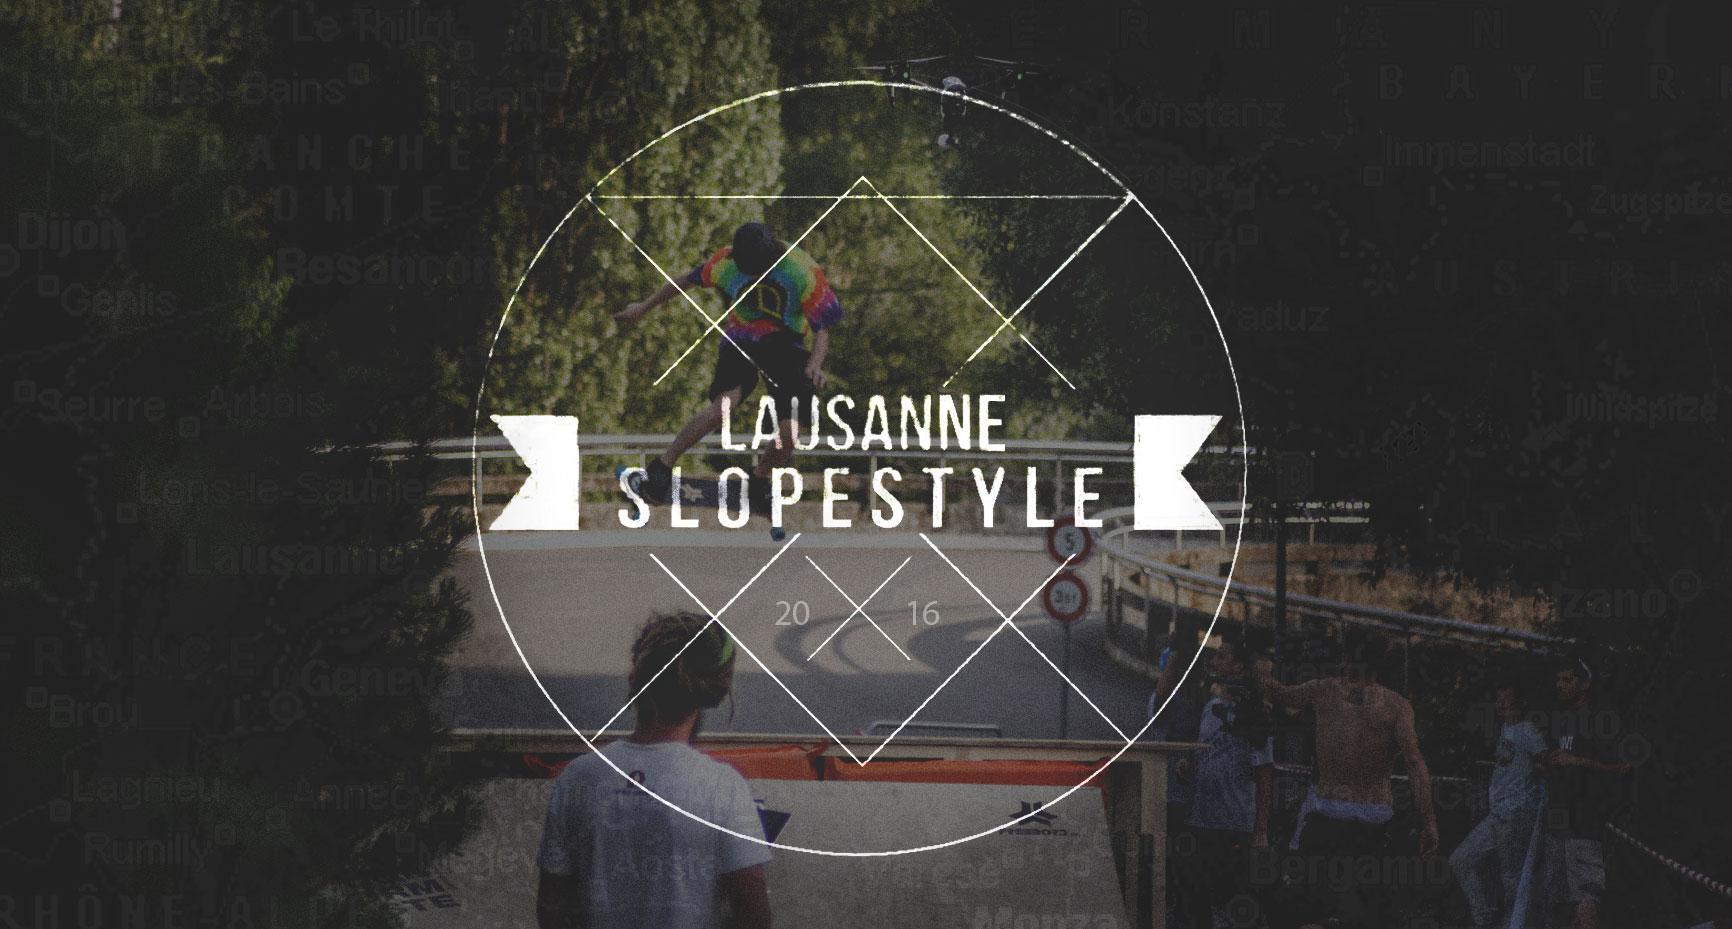 Lausanne Slopestyle 2016 – Date Confirmed